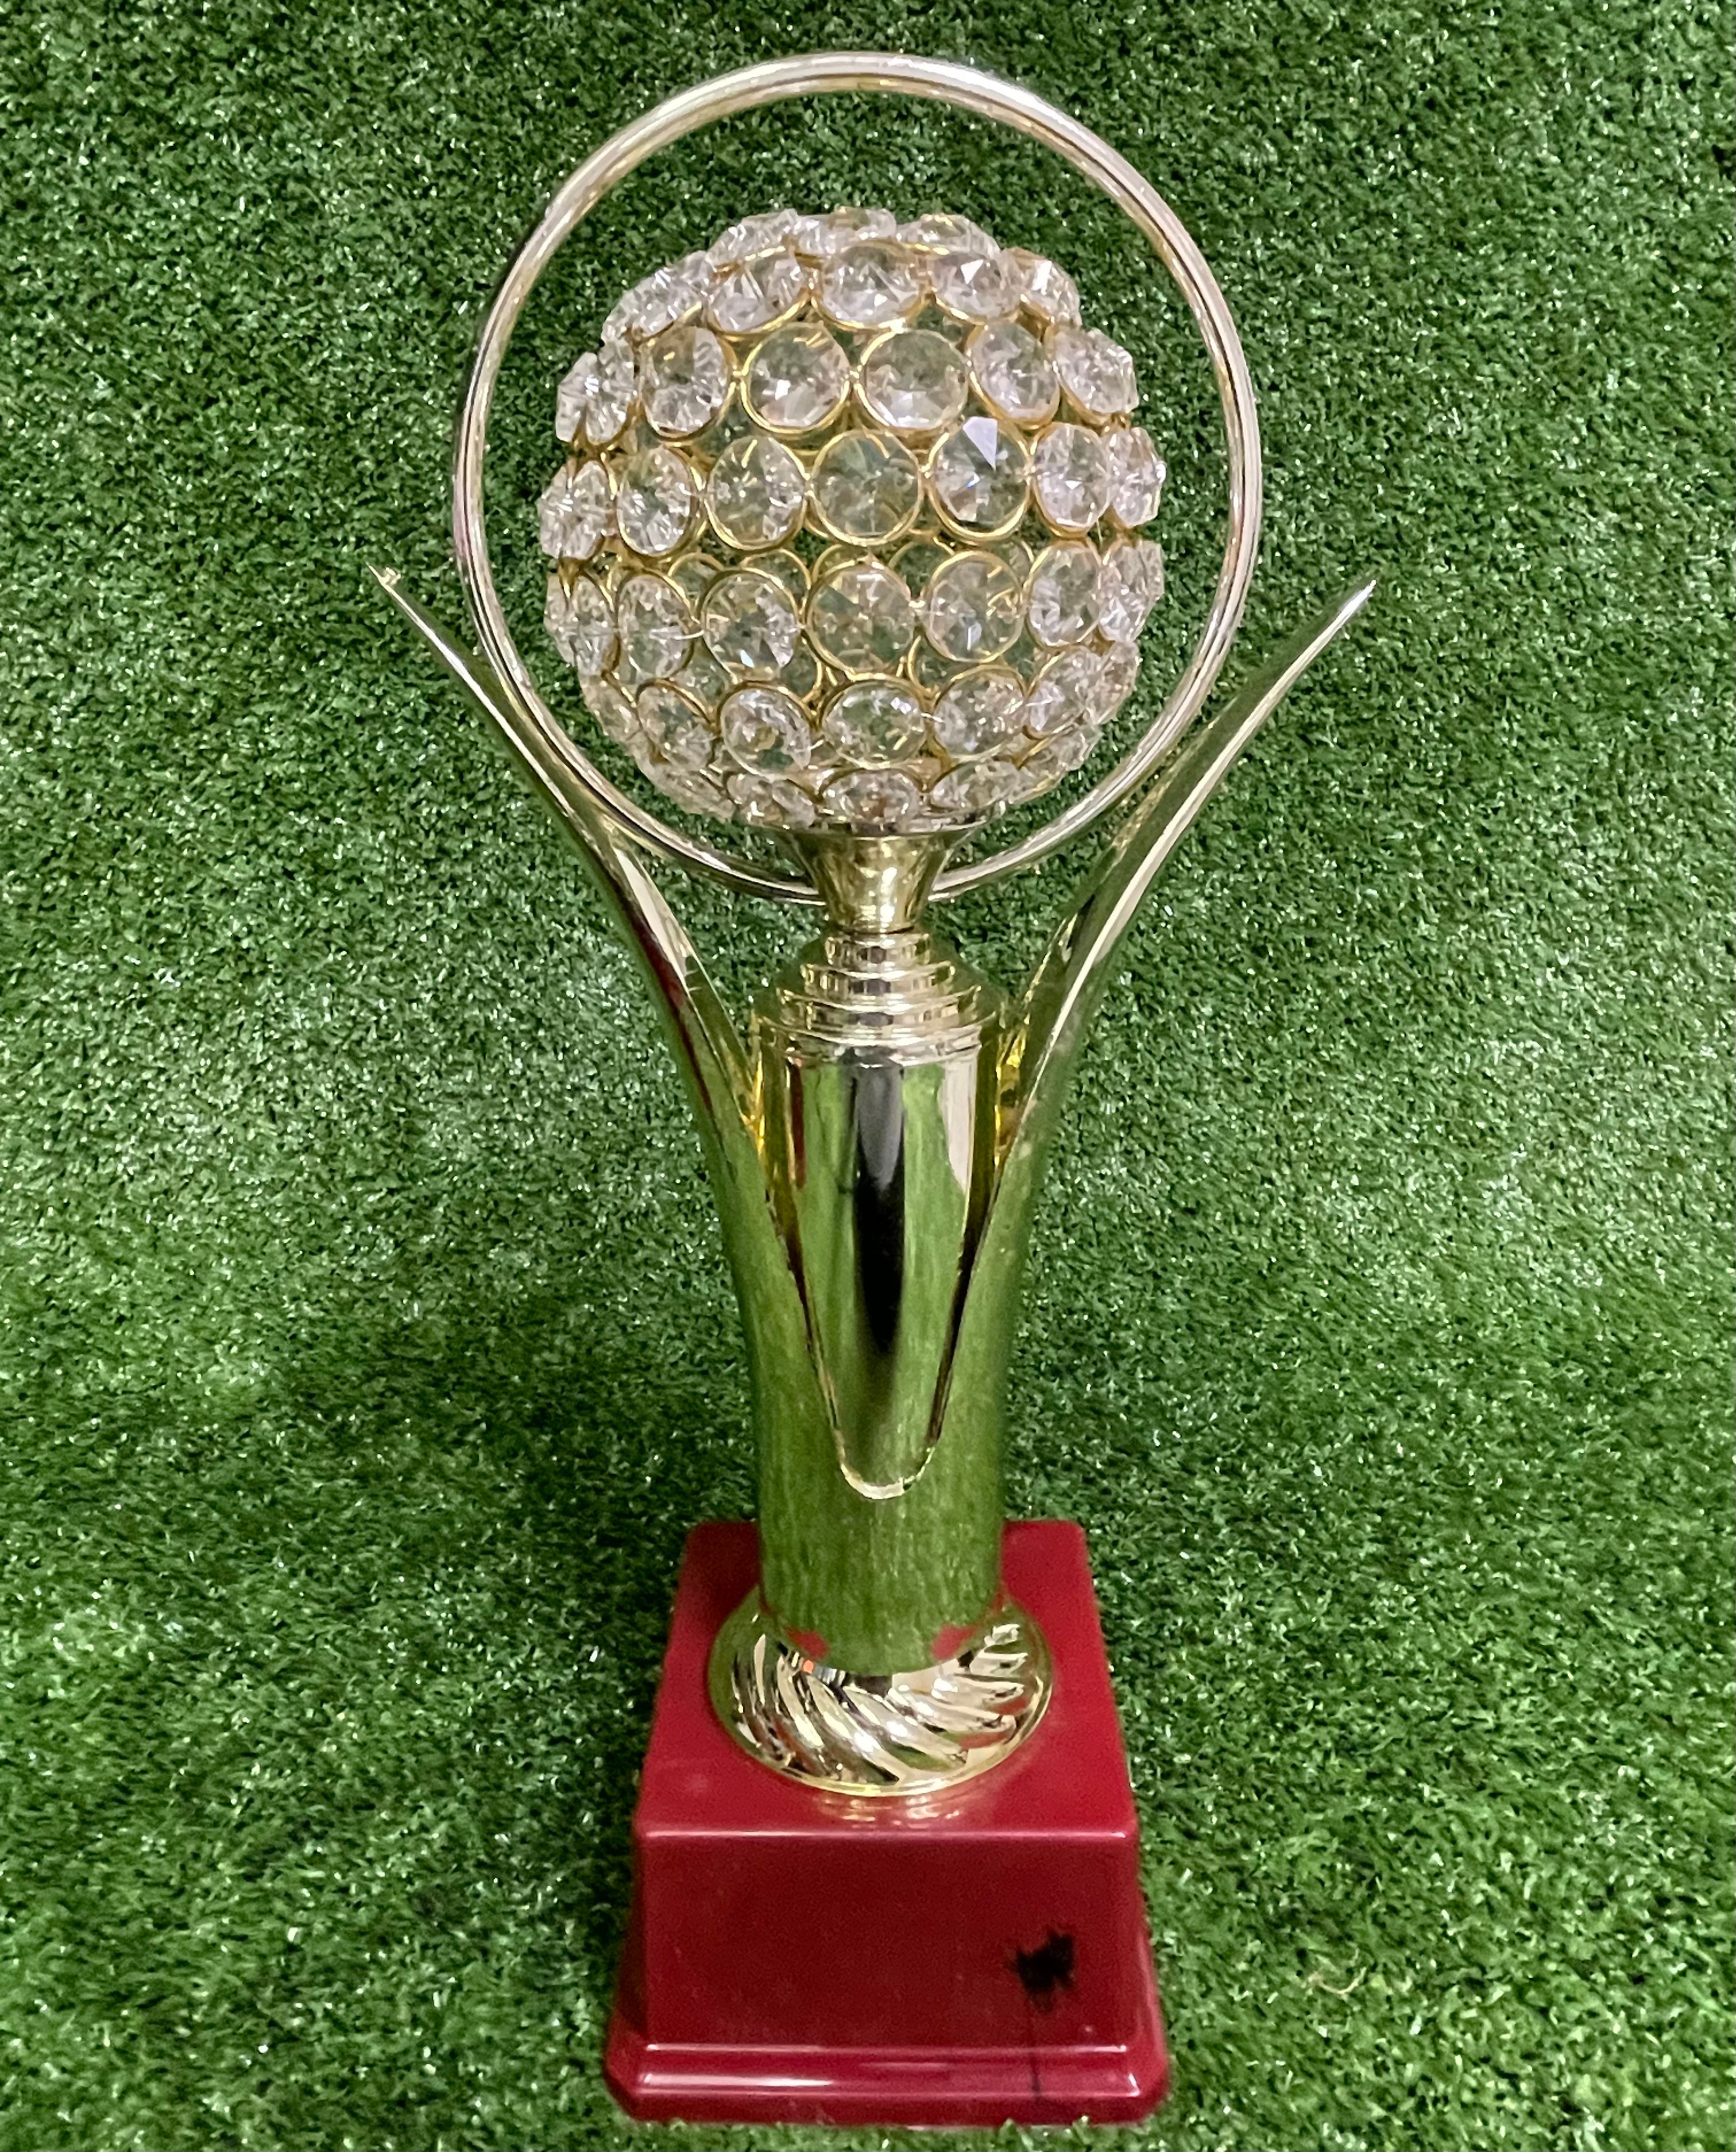 Cricket Trophy With Globe(15 inches height)